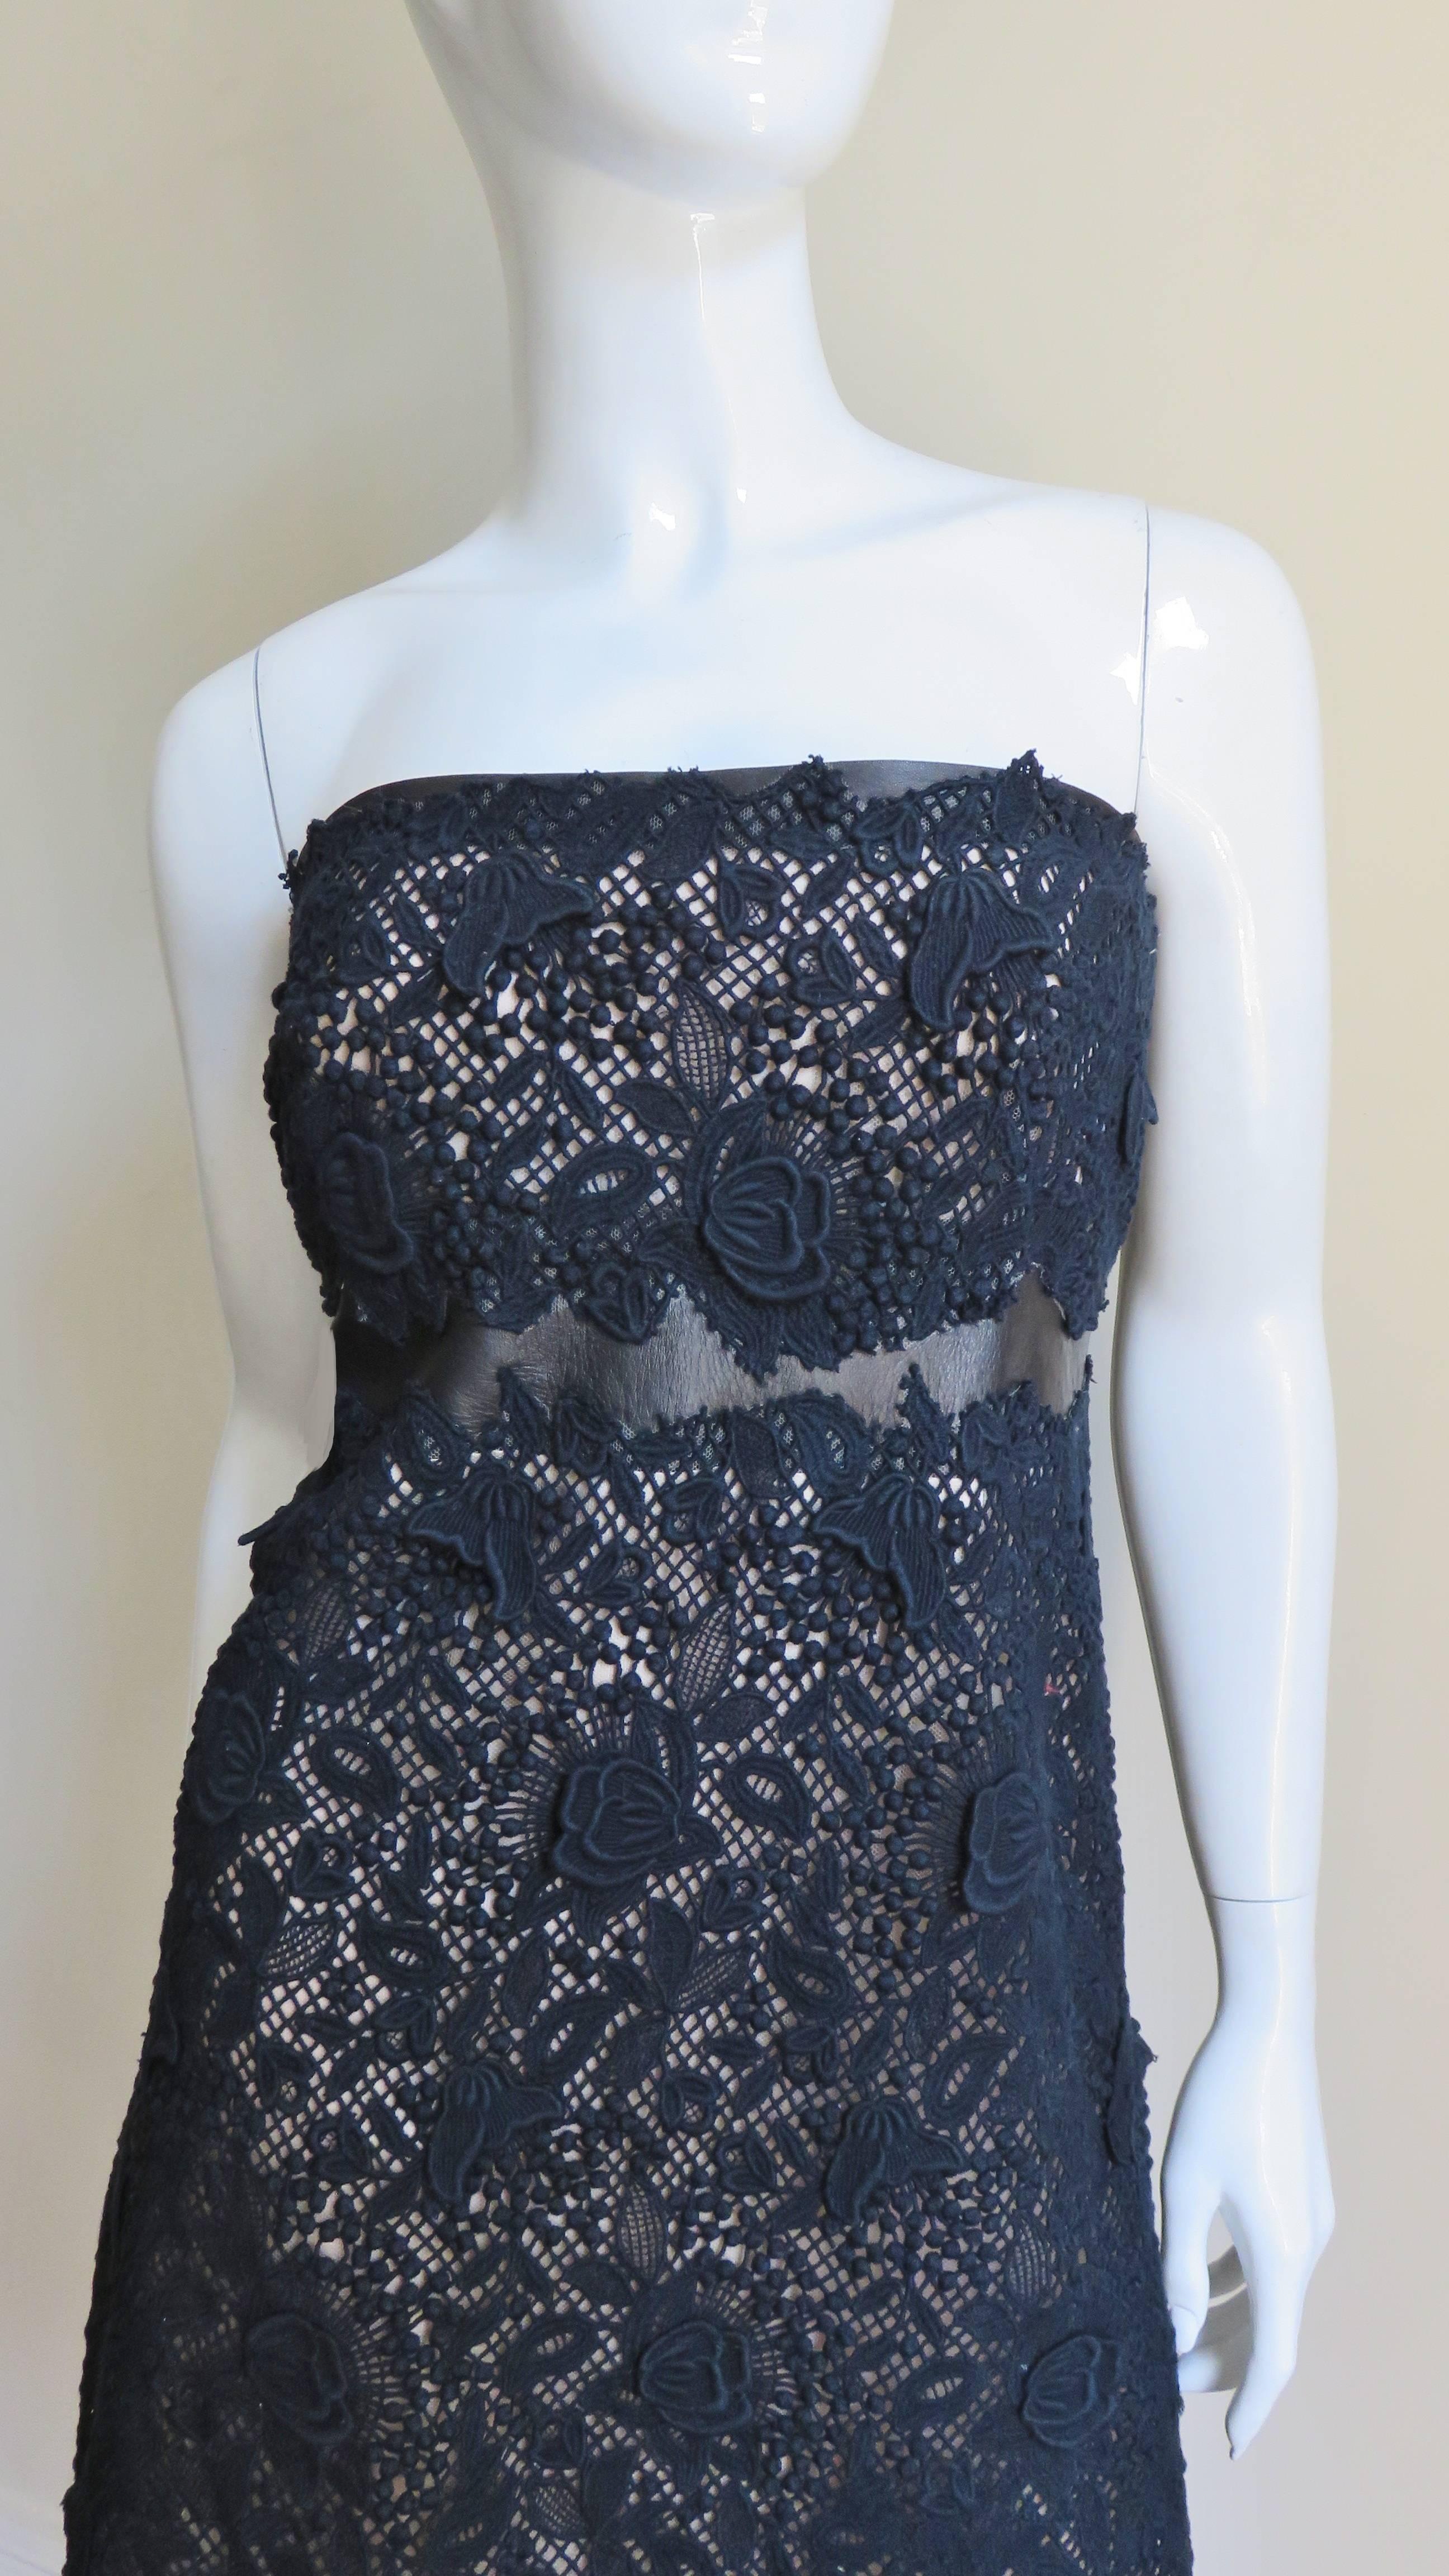 A fabulous strapless black lace dress from Valentino. The body of the dress is comprised of rich elaborate black floral lace with a black leather band above and below the bust around the circumference of the dress. The bodice has an inner boned